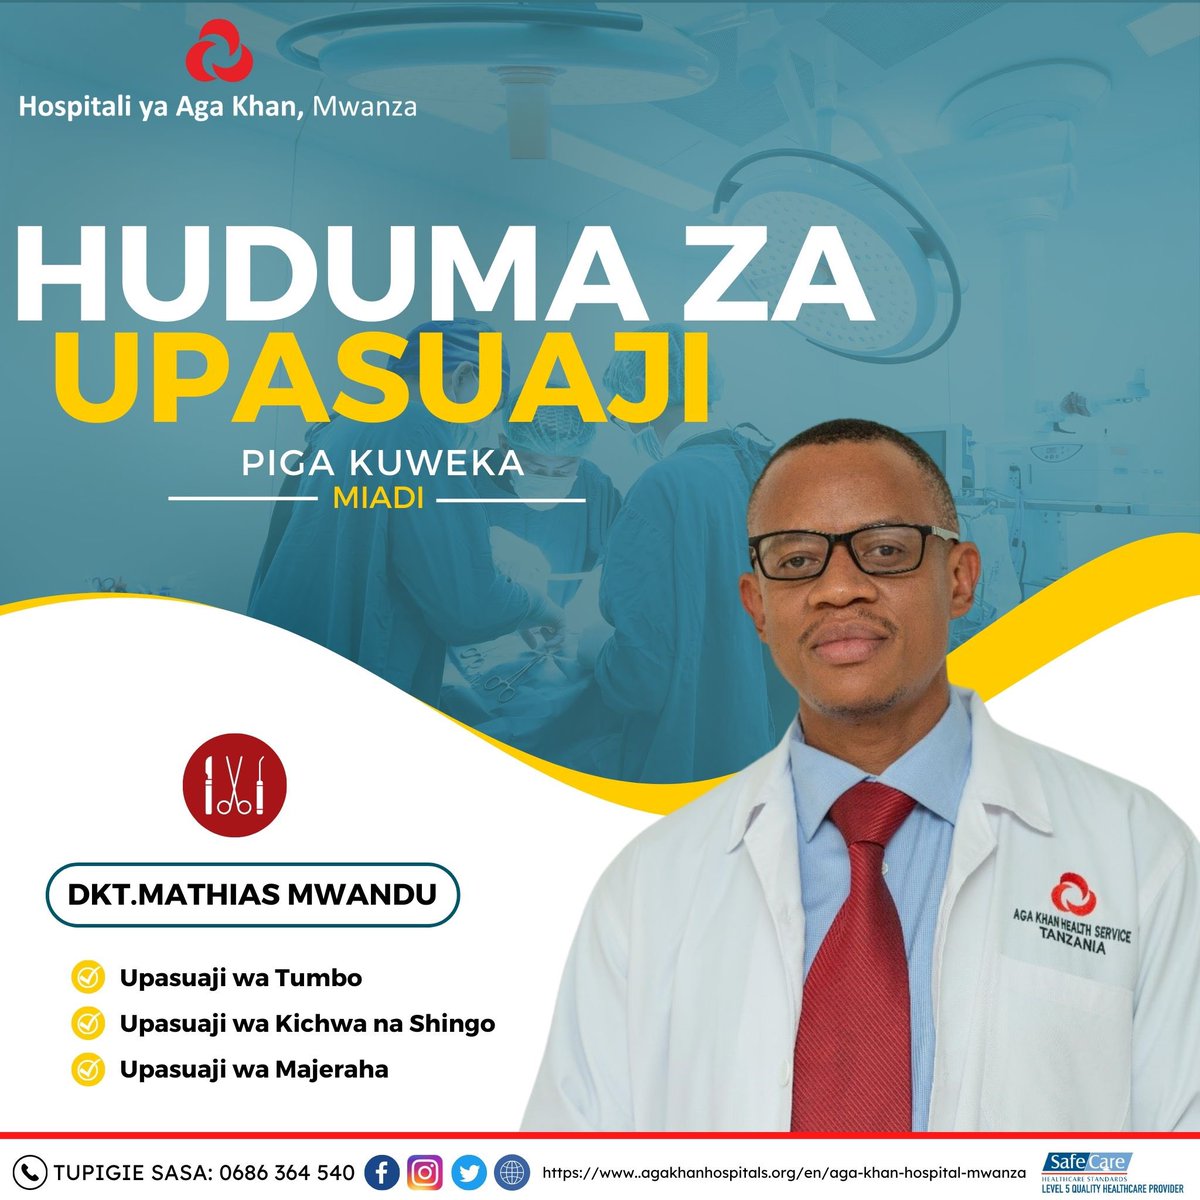 Get convenient and personalized surgical services from our expert General Surgeon  Dr. Mathias Mwandu via 0686 364 540.

#agakhanhospitalmwanza #expertadvise #healthcare  #tanzania #mwanza #surgery #surgicalprocedures #surgeon #generalsurgery #surgeryrecovery